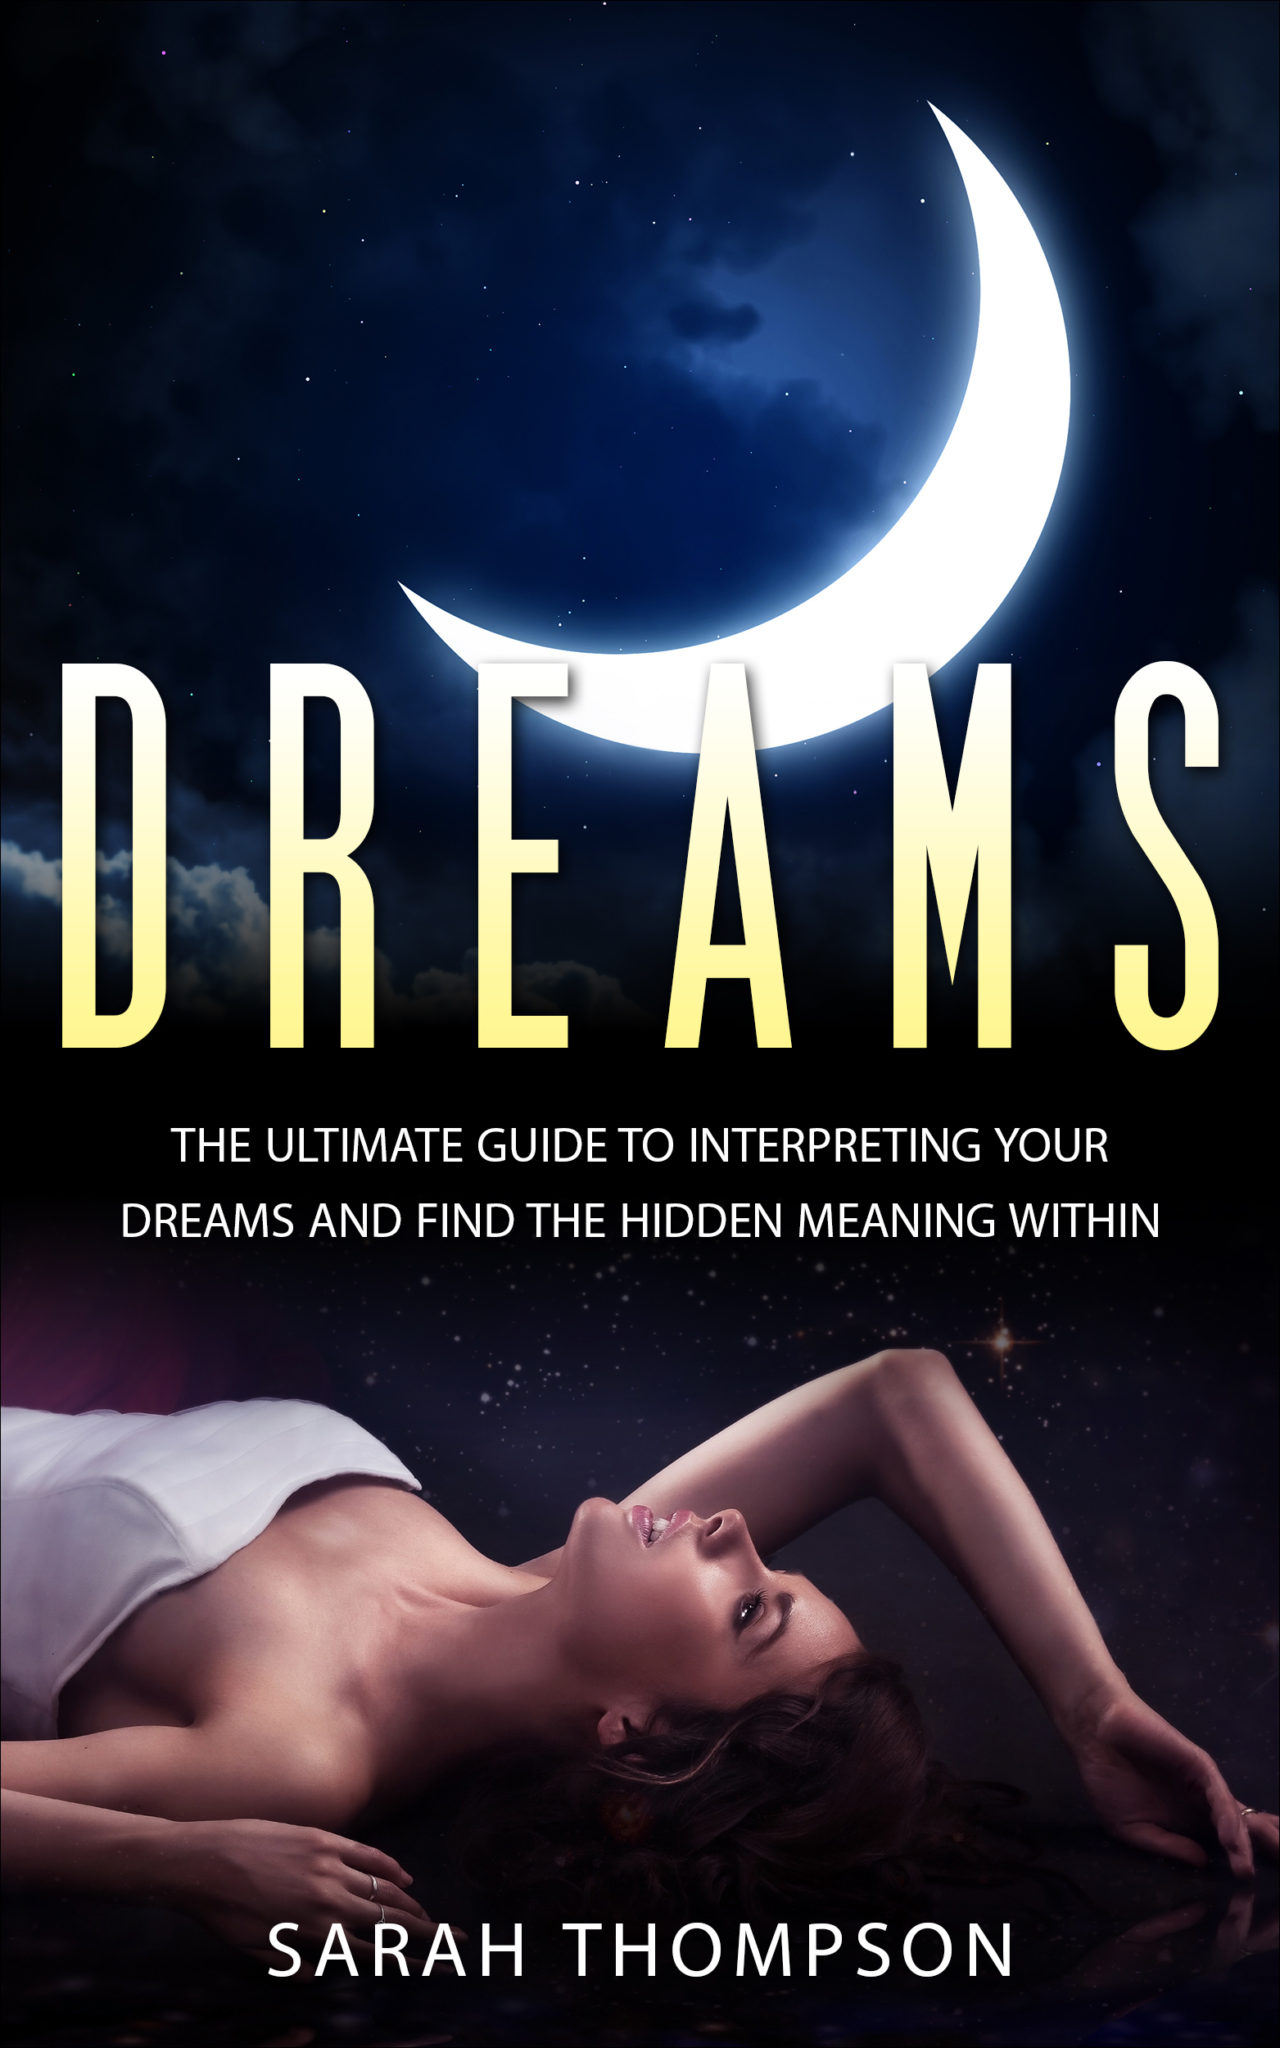 FREE: Dream Interpretation: The Ultimate Guide to Interpreting Your Dreams and Finding the Hidden Meanings (Free Bonus Included!) (dreams, lucid dreaming, astral projection, dream interpretation) by Sarah Thompson